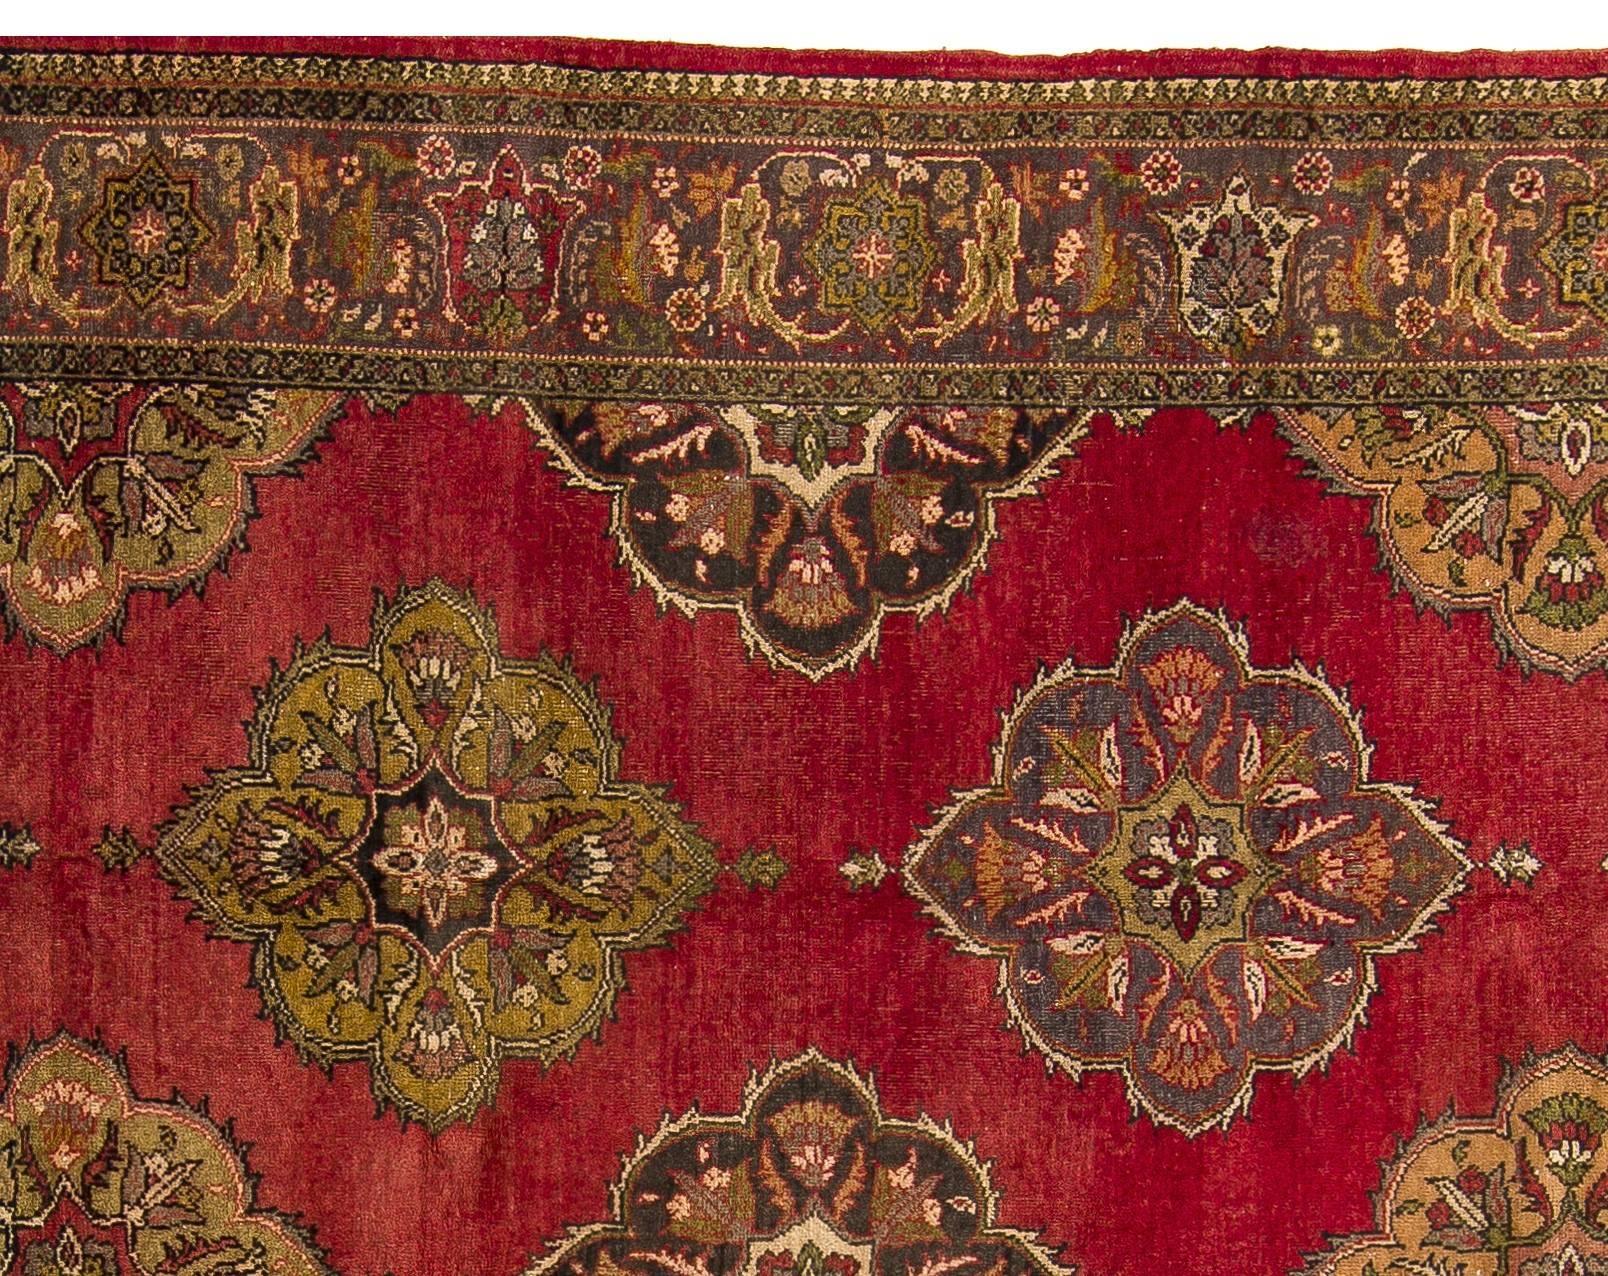 A large, decorative Oushak wool rug hand-knotted possibly by Greeks of Anatolia in the first half of the 20th century. It features a design of curvilinear, octagonal medallions in chartreuse and bluish gray in multiple rows across the length of a